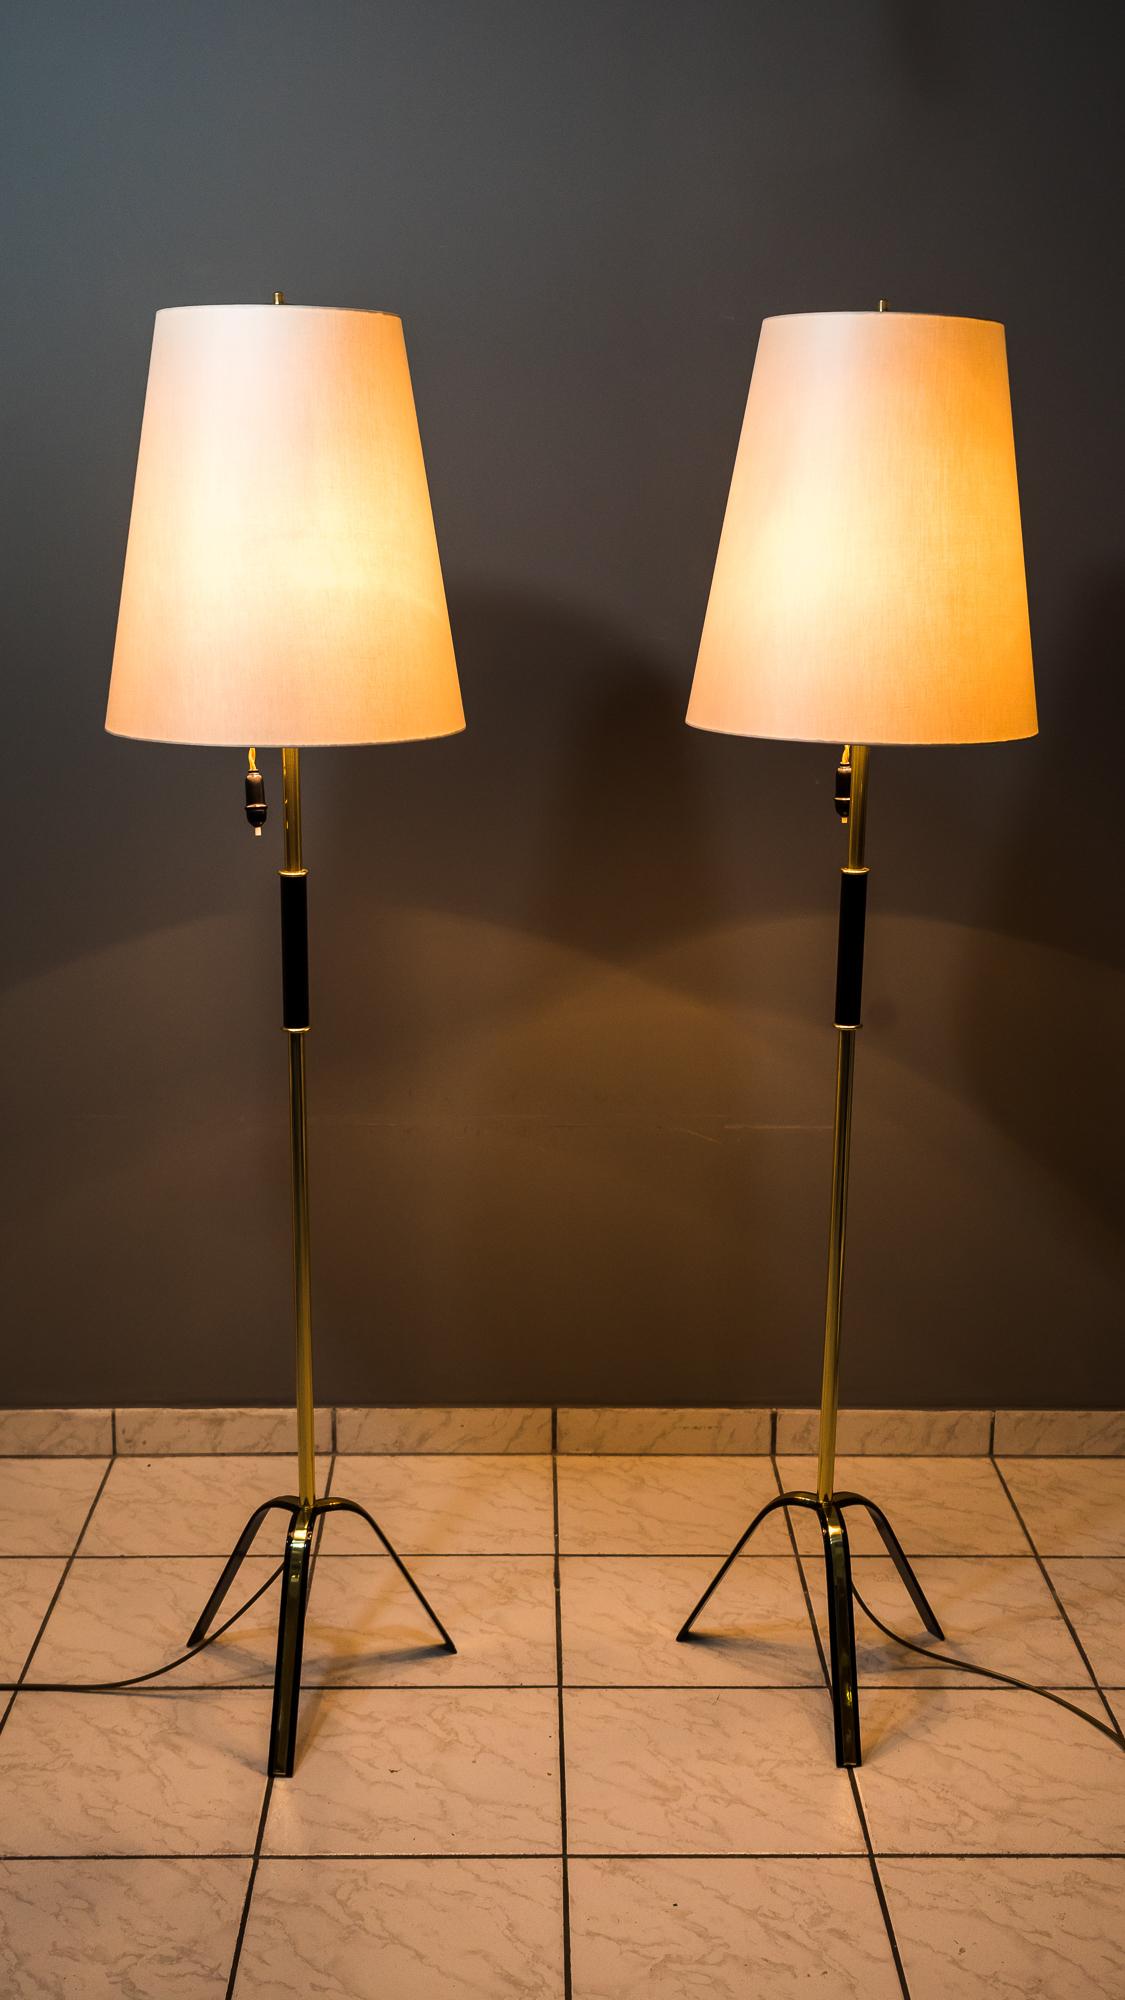 Two Rupert Nikoll floor lamps, Vienna, circa 1960s
Iron black lacquered
Brass polished and lacquered
The shades are replaced (new).